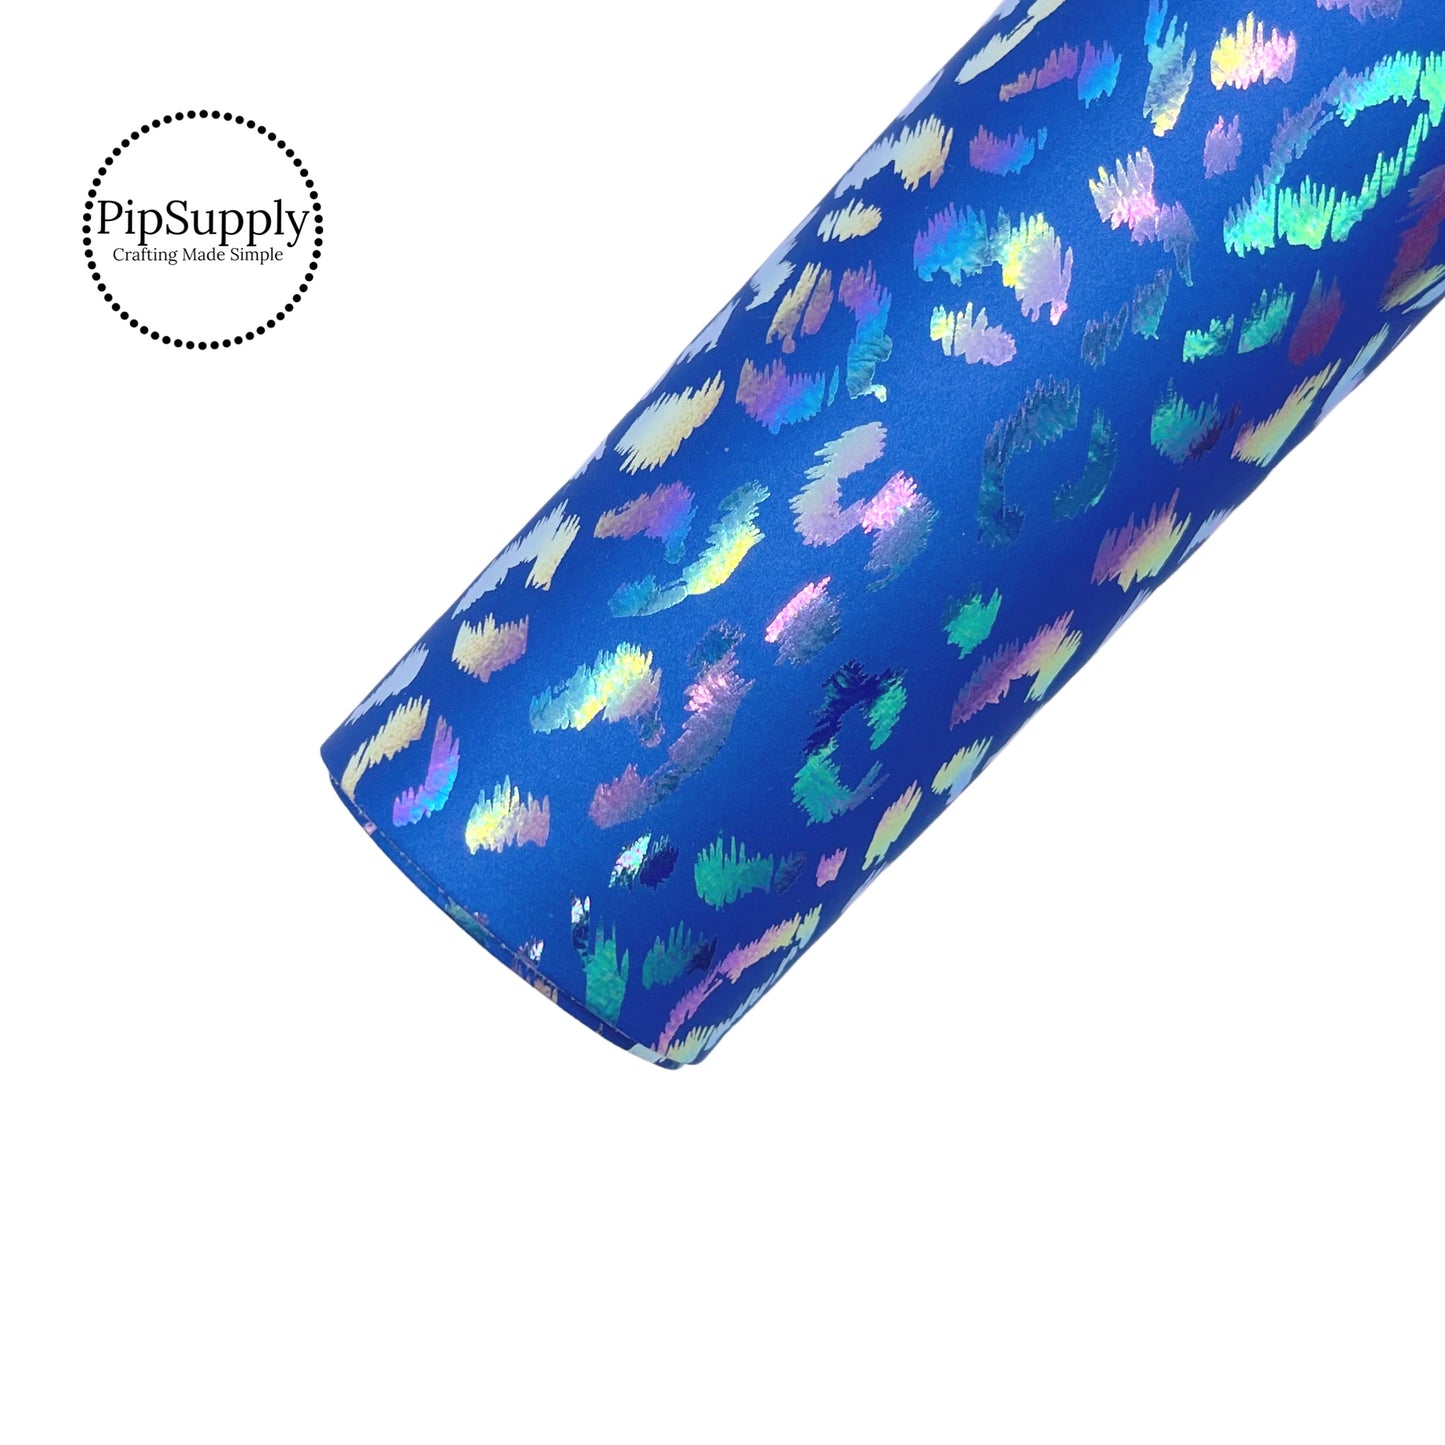 Iridescent leopard spots on blue faux leather sheets